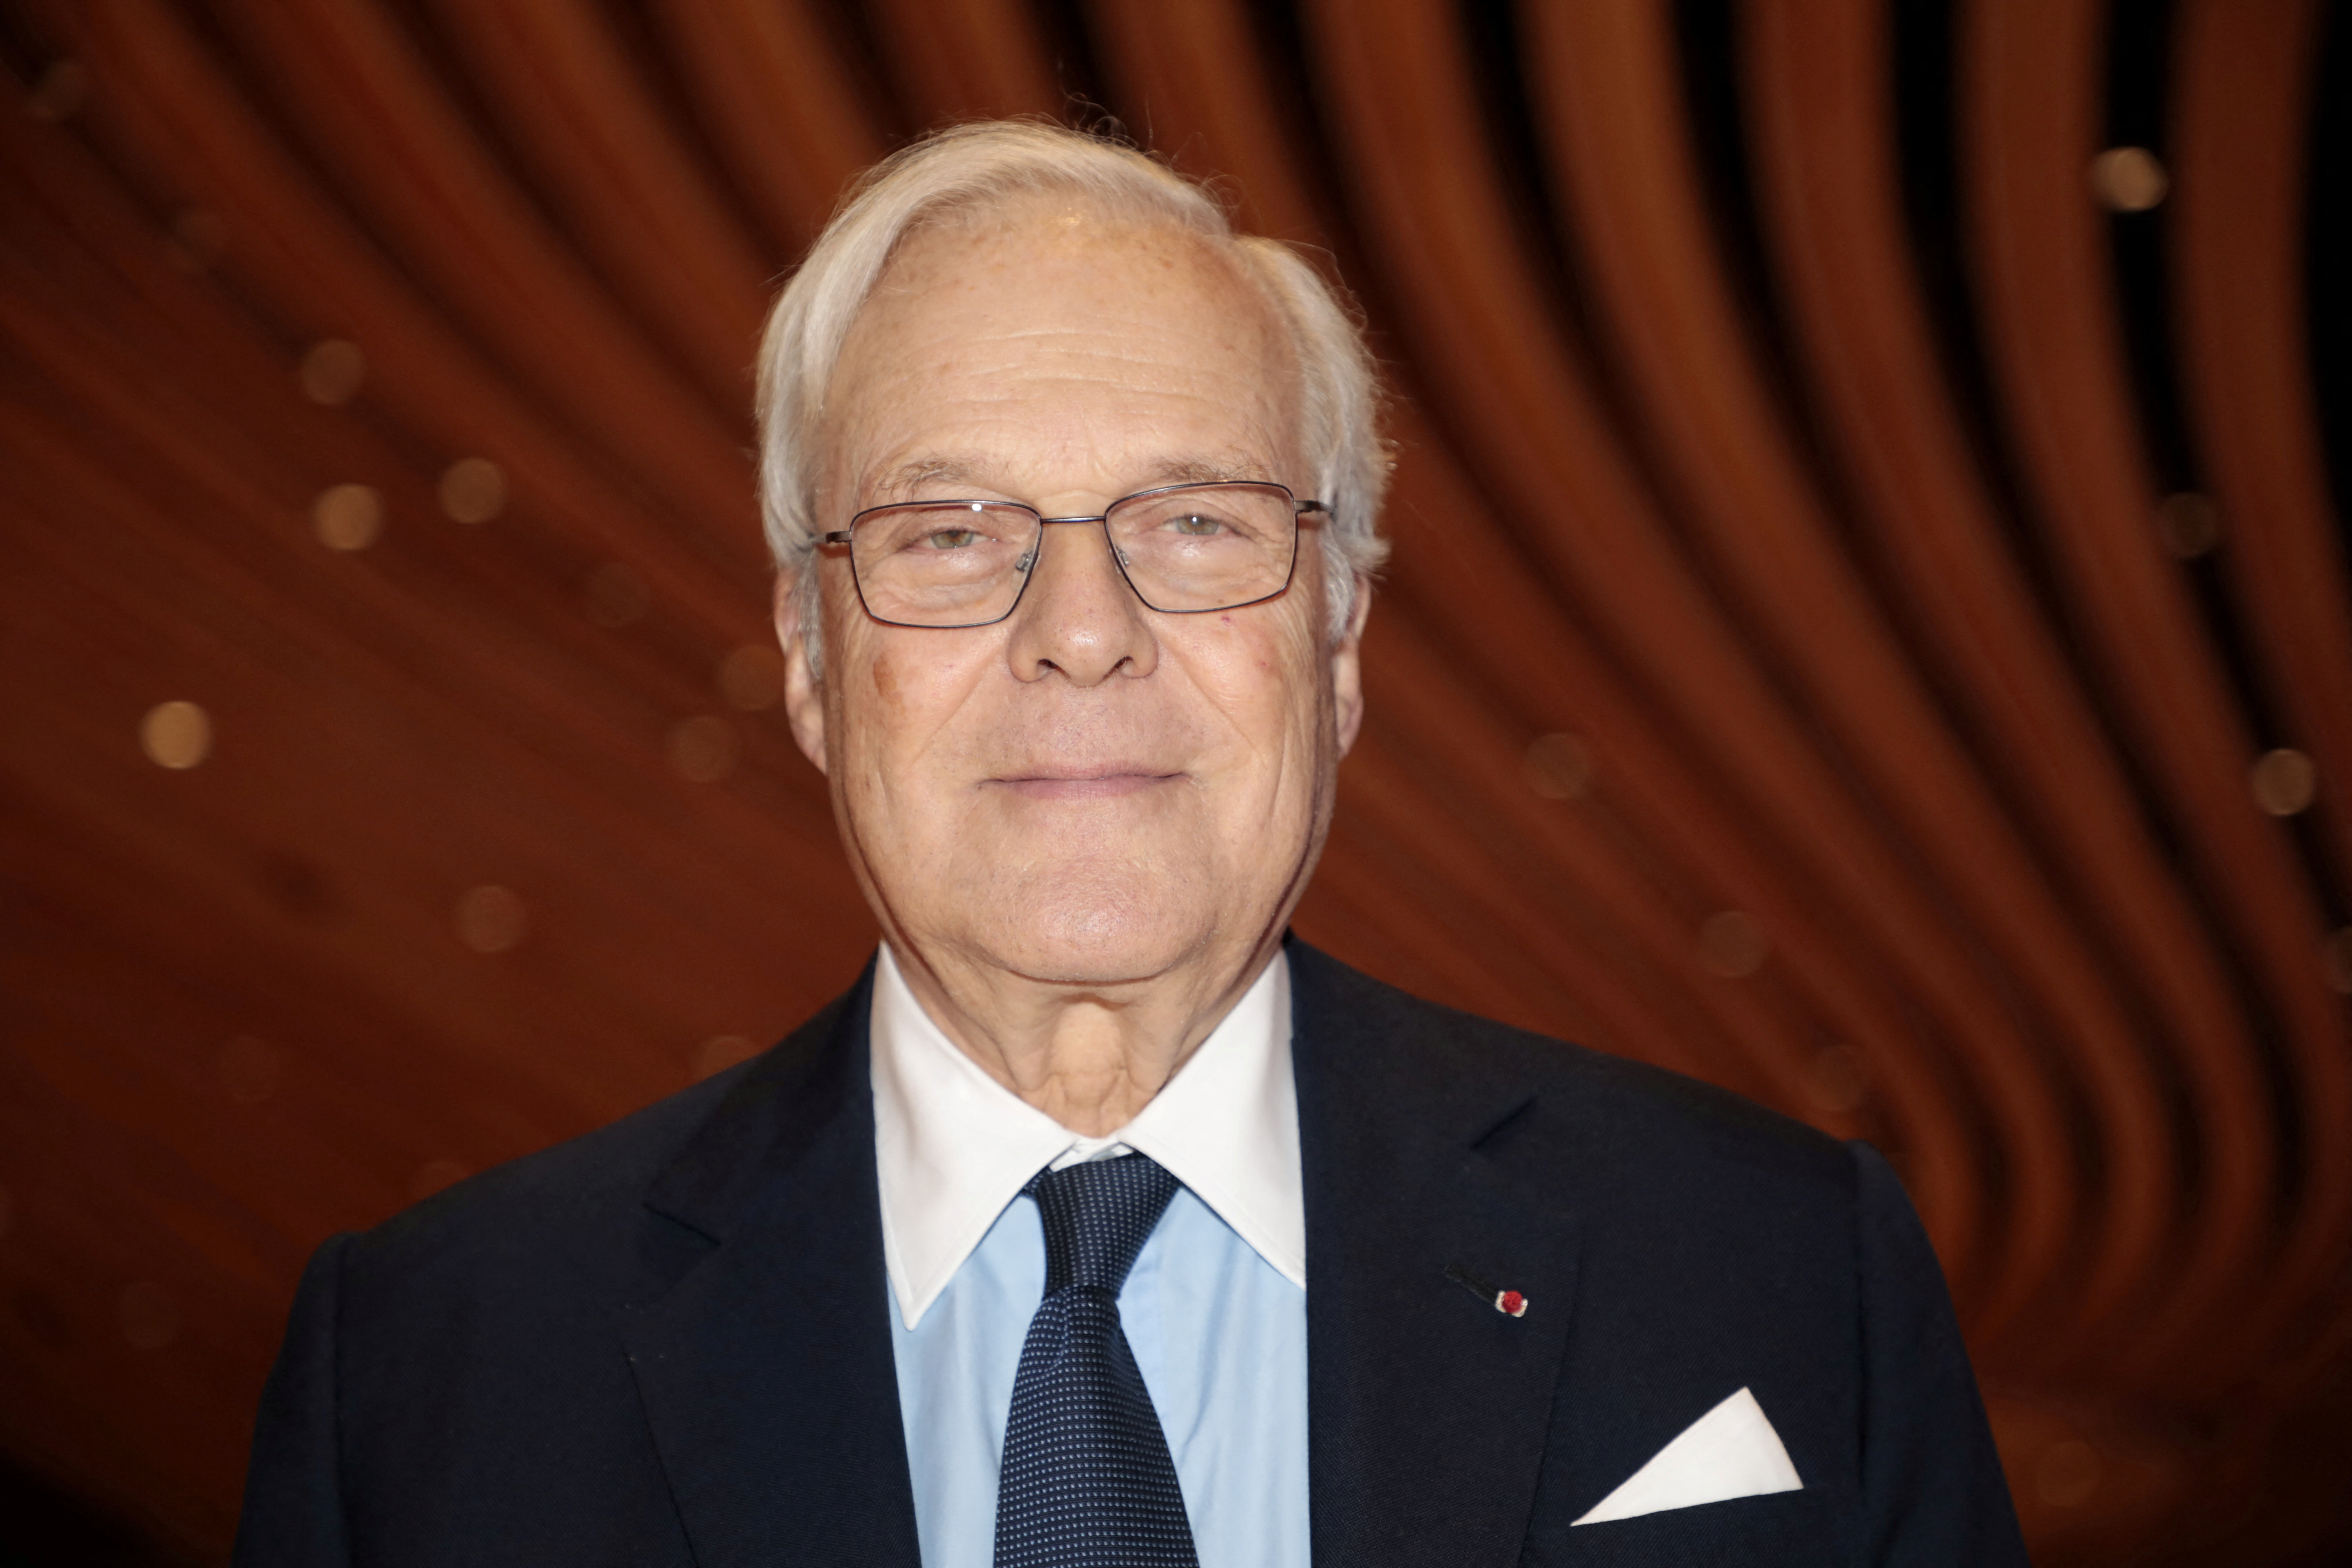 Banker David De Rothschild for the 34th annual dinner of the CRIF in Paris